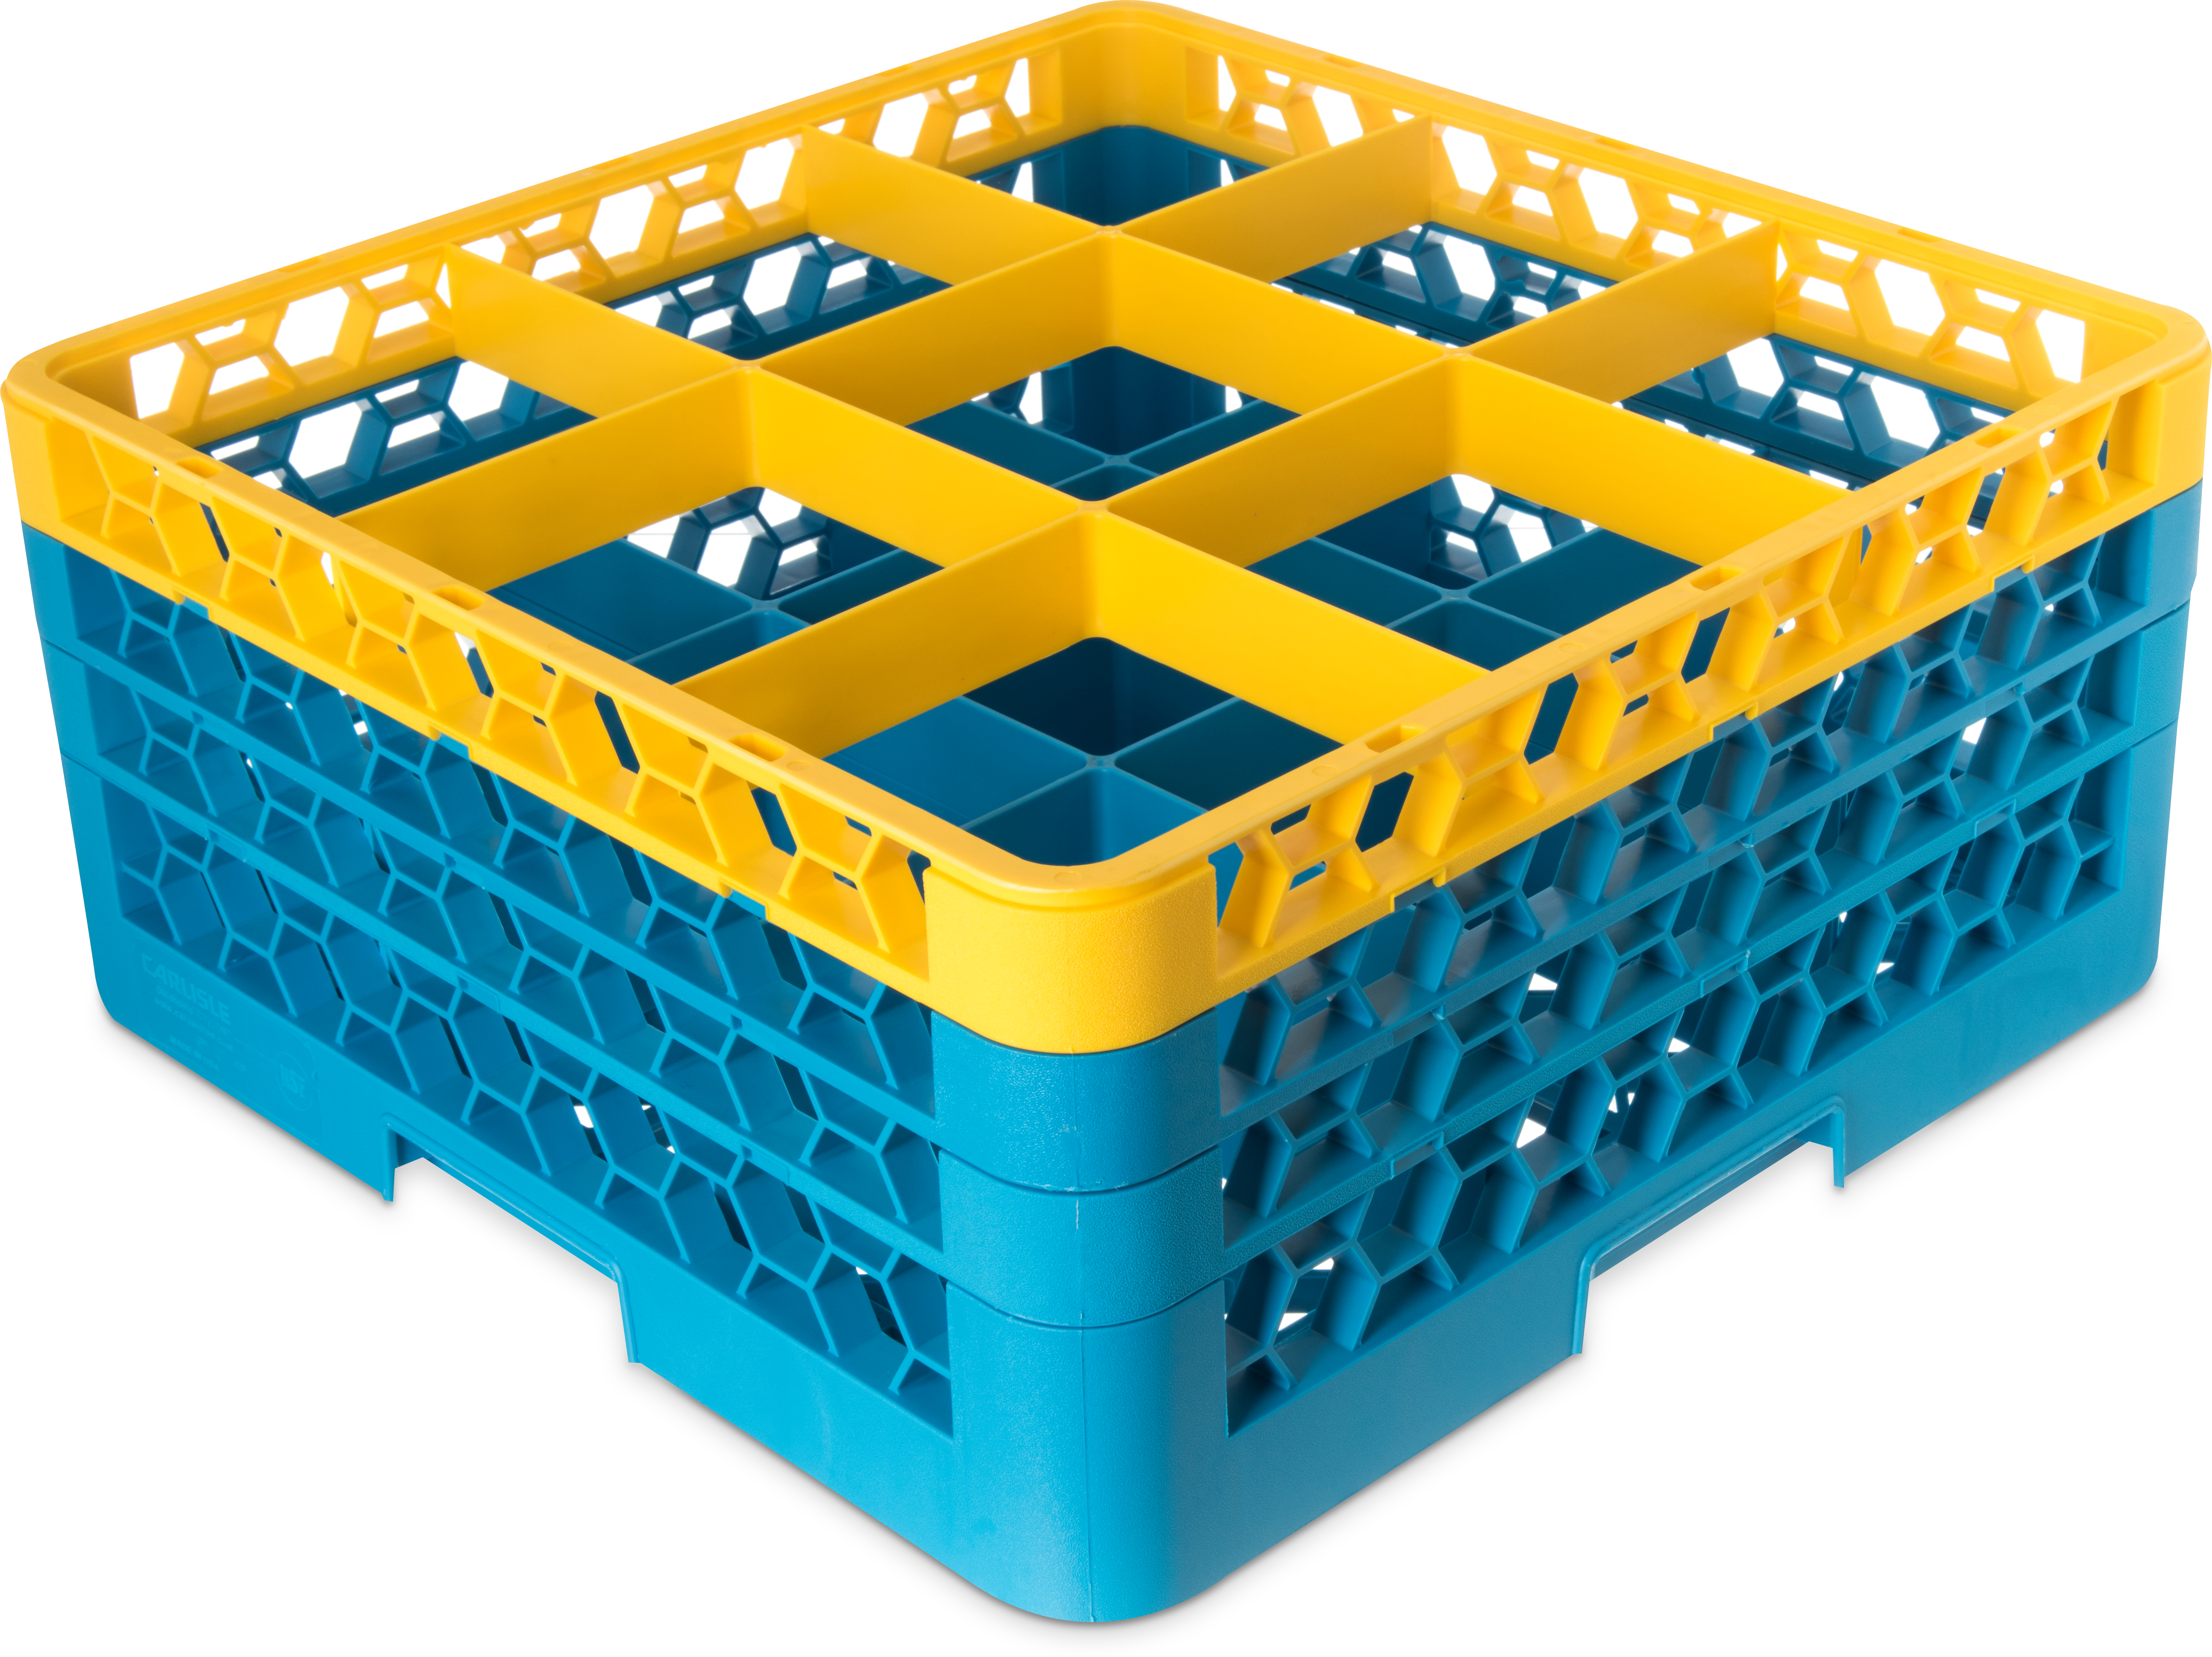 OptiClean 9 Compartment Glass Rack with 3 Extenders 8.72 - Yellow-Carlisle Blue